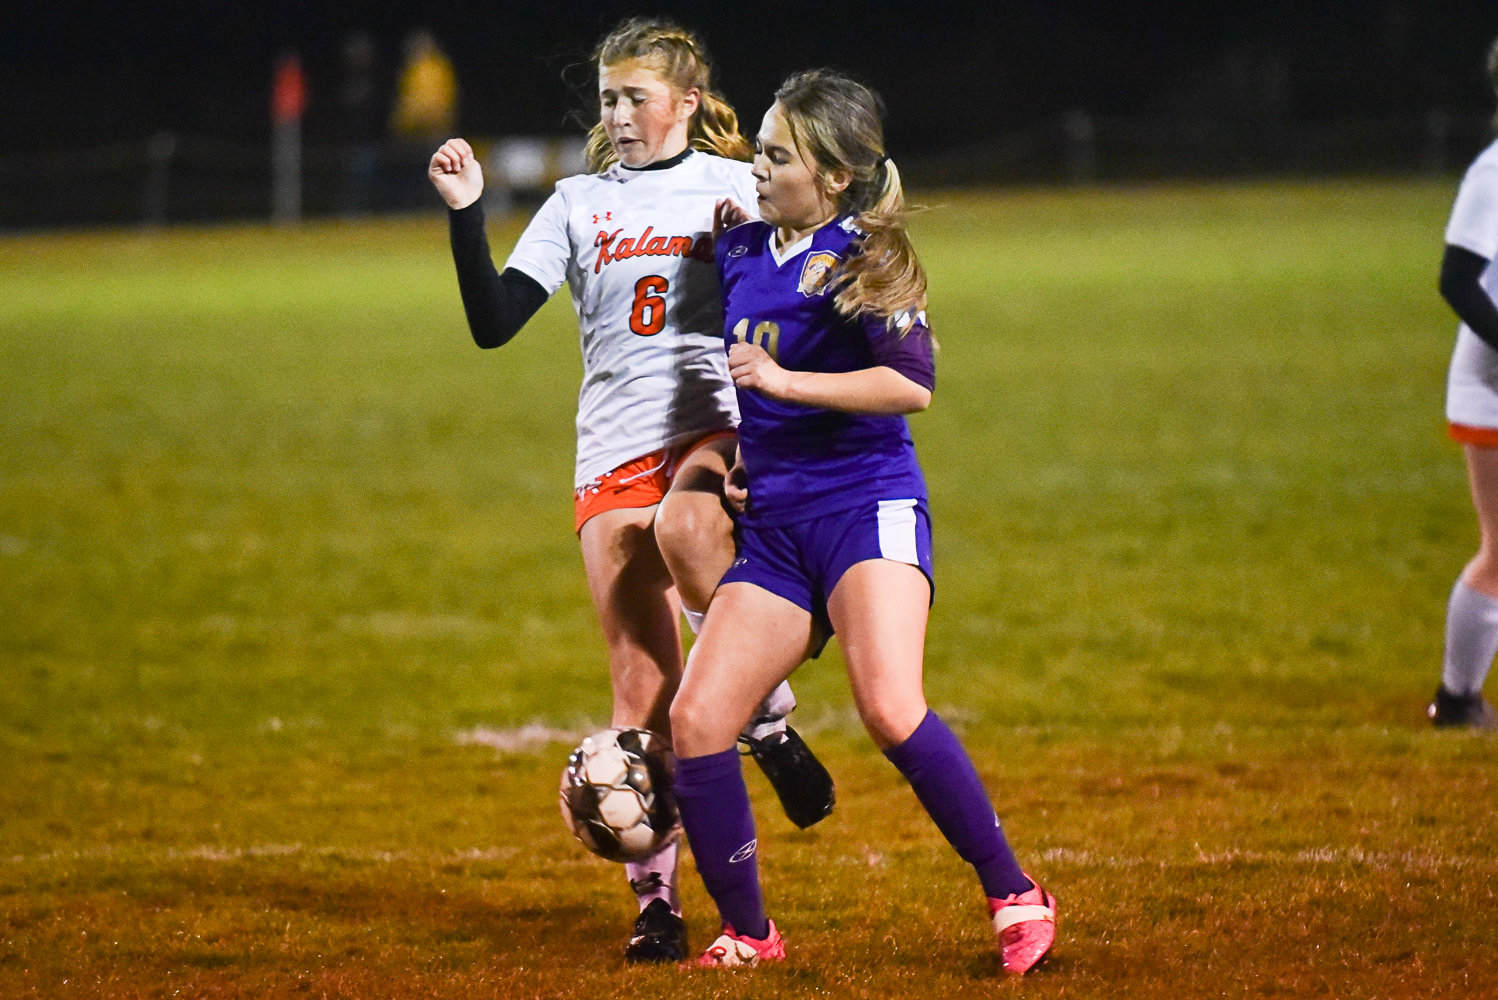 Onalaska's Yuliana Escalara wins a shoulder-to-shoulder battle with Kalama's Elly Foreman during the Chinooks' 6-0 win over the Loggers on Oct. 26.